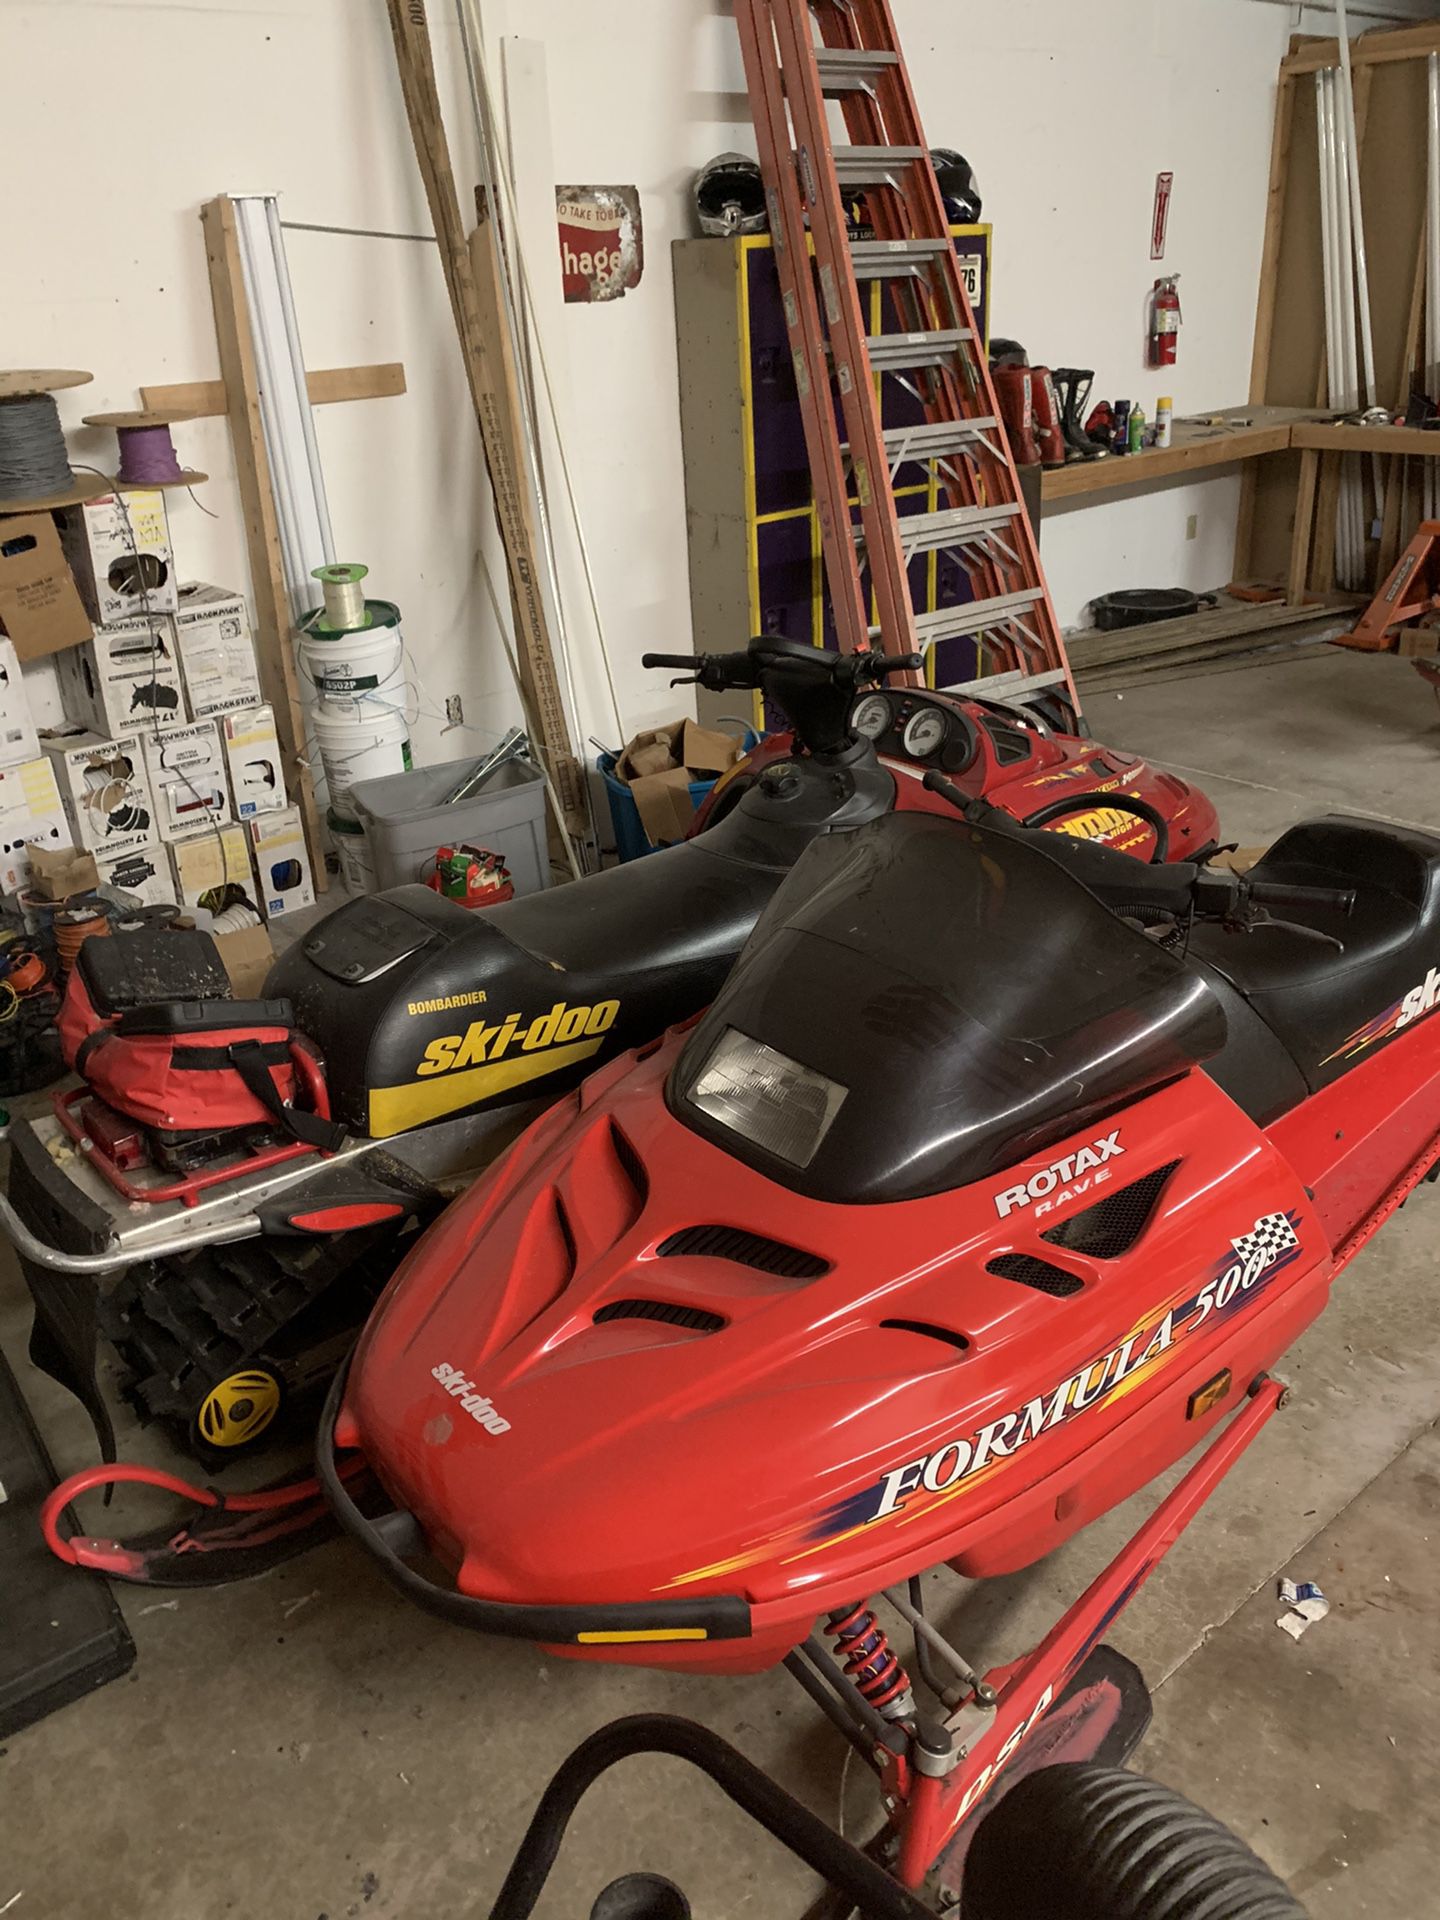 Want to trade 2 skidoo snowmobiles